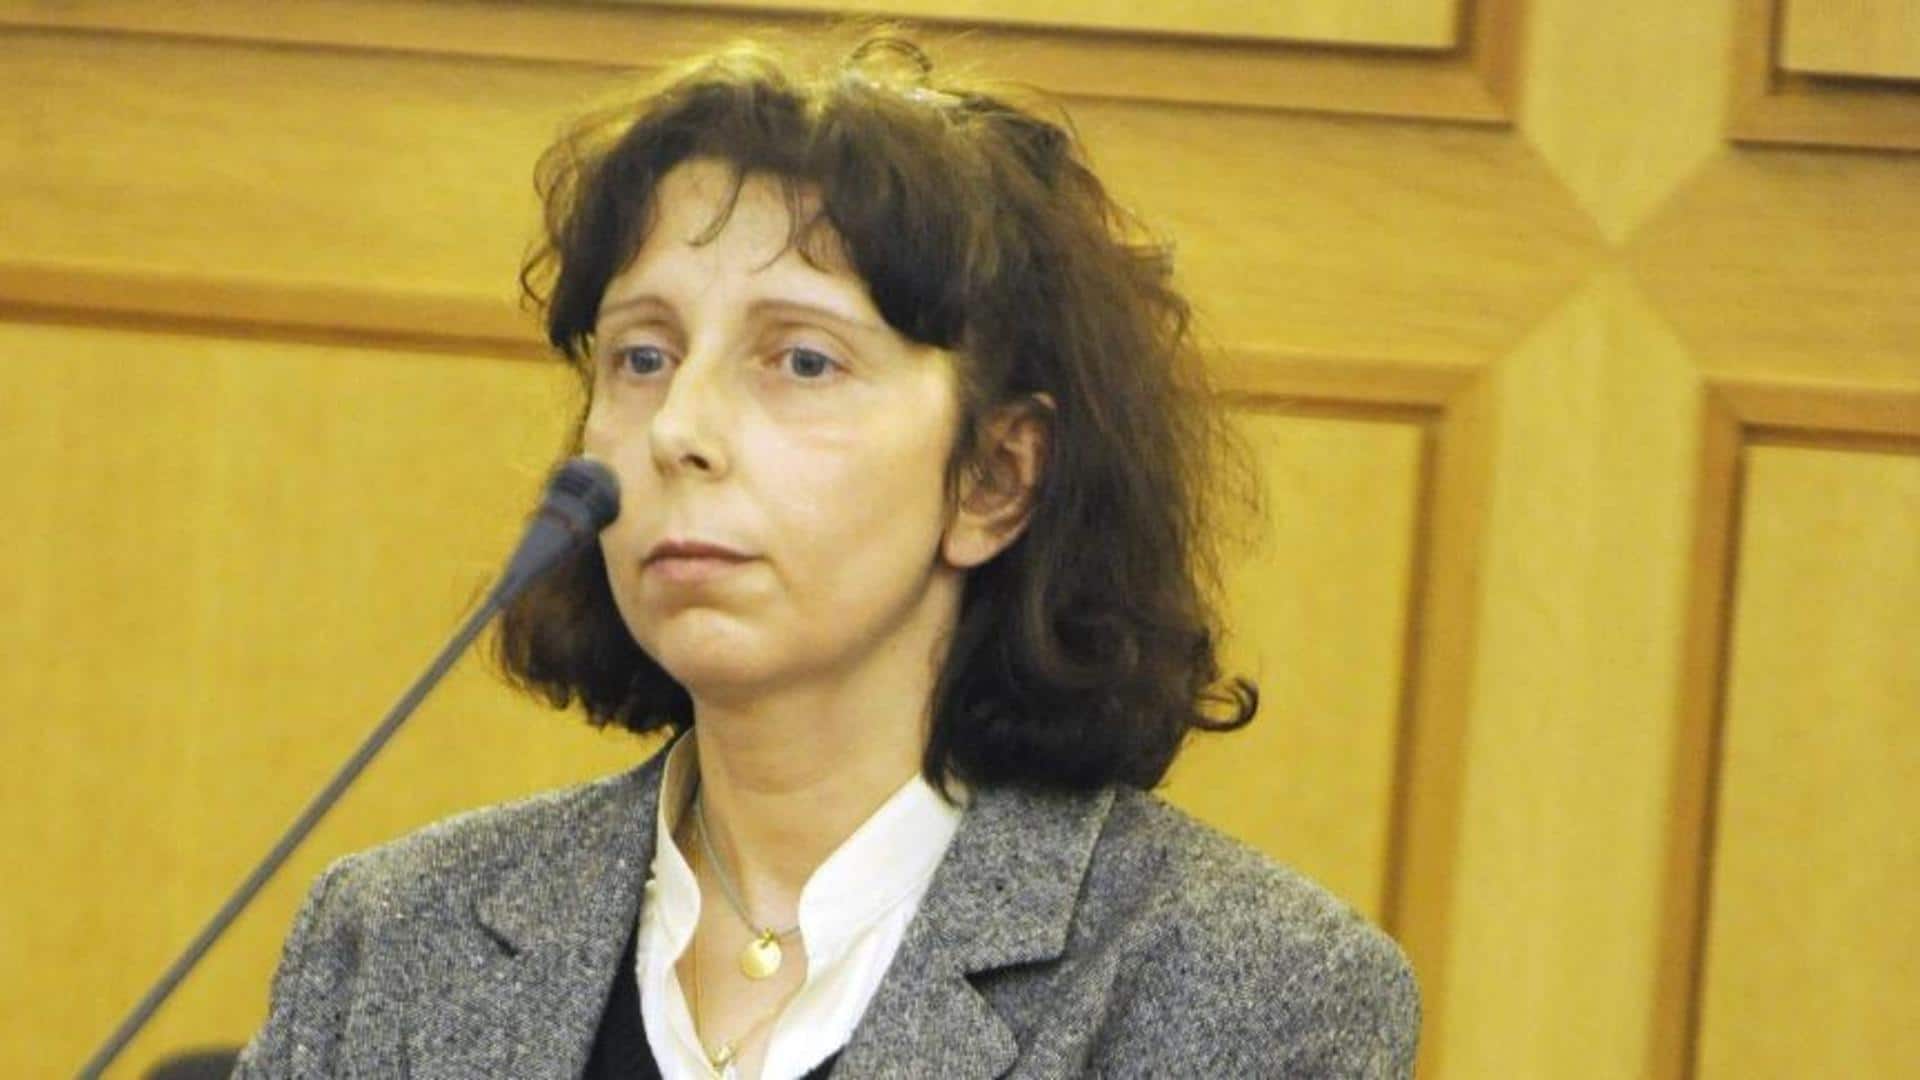 Belgium: Mother who murdered 5 children euthanized after 16 years 